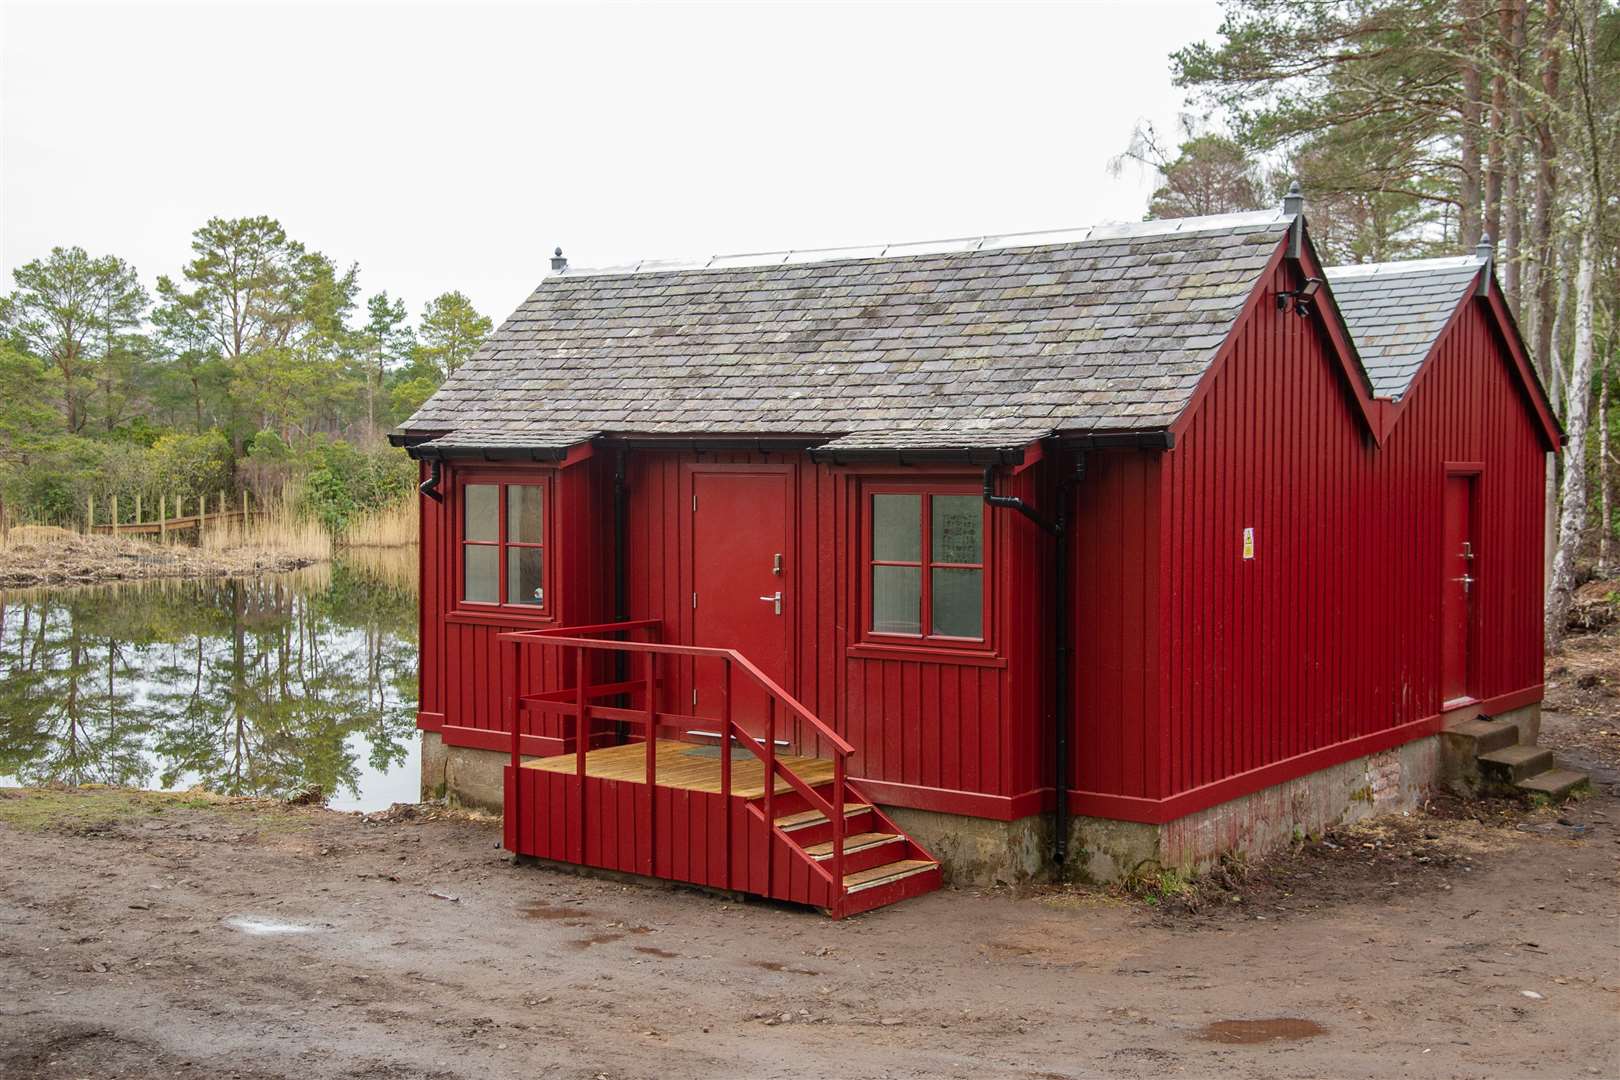 The refurbished bothy next to the boathouse.